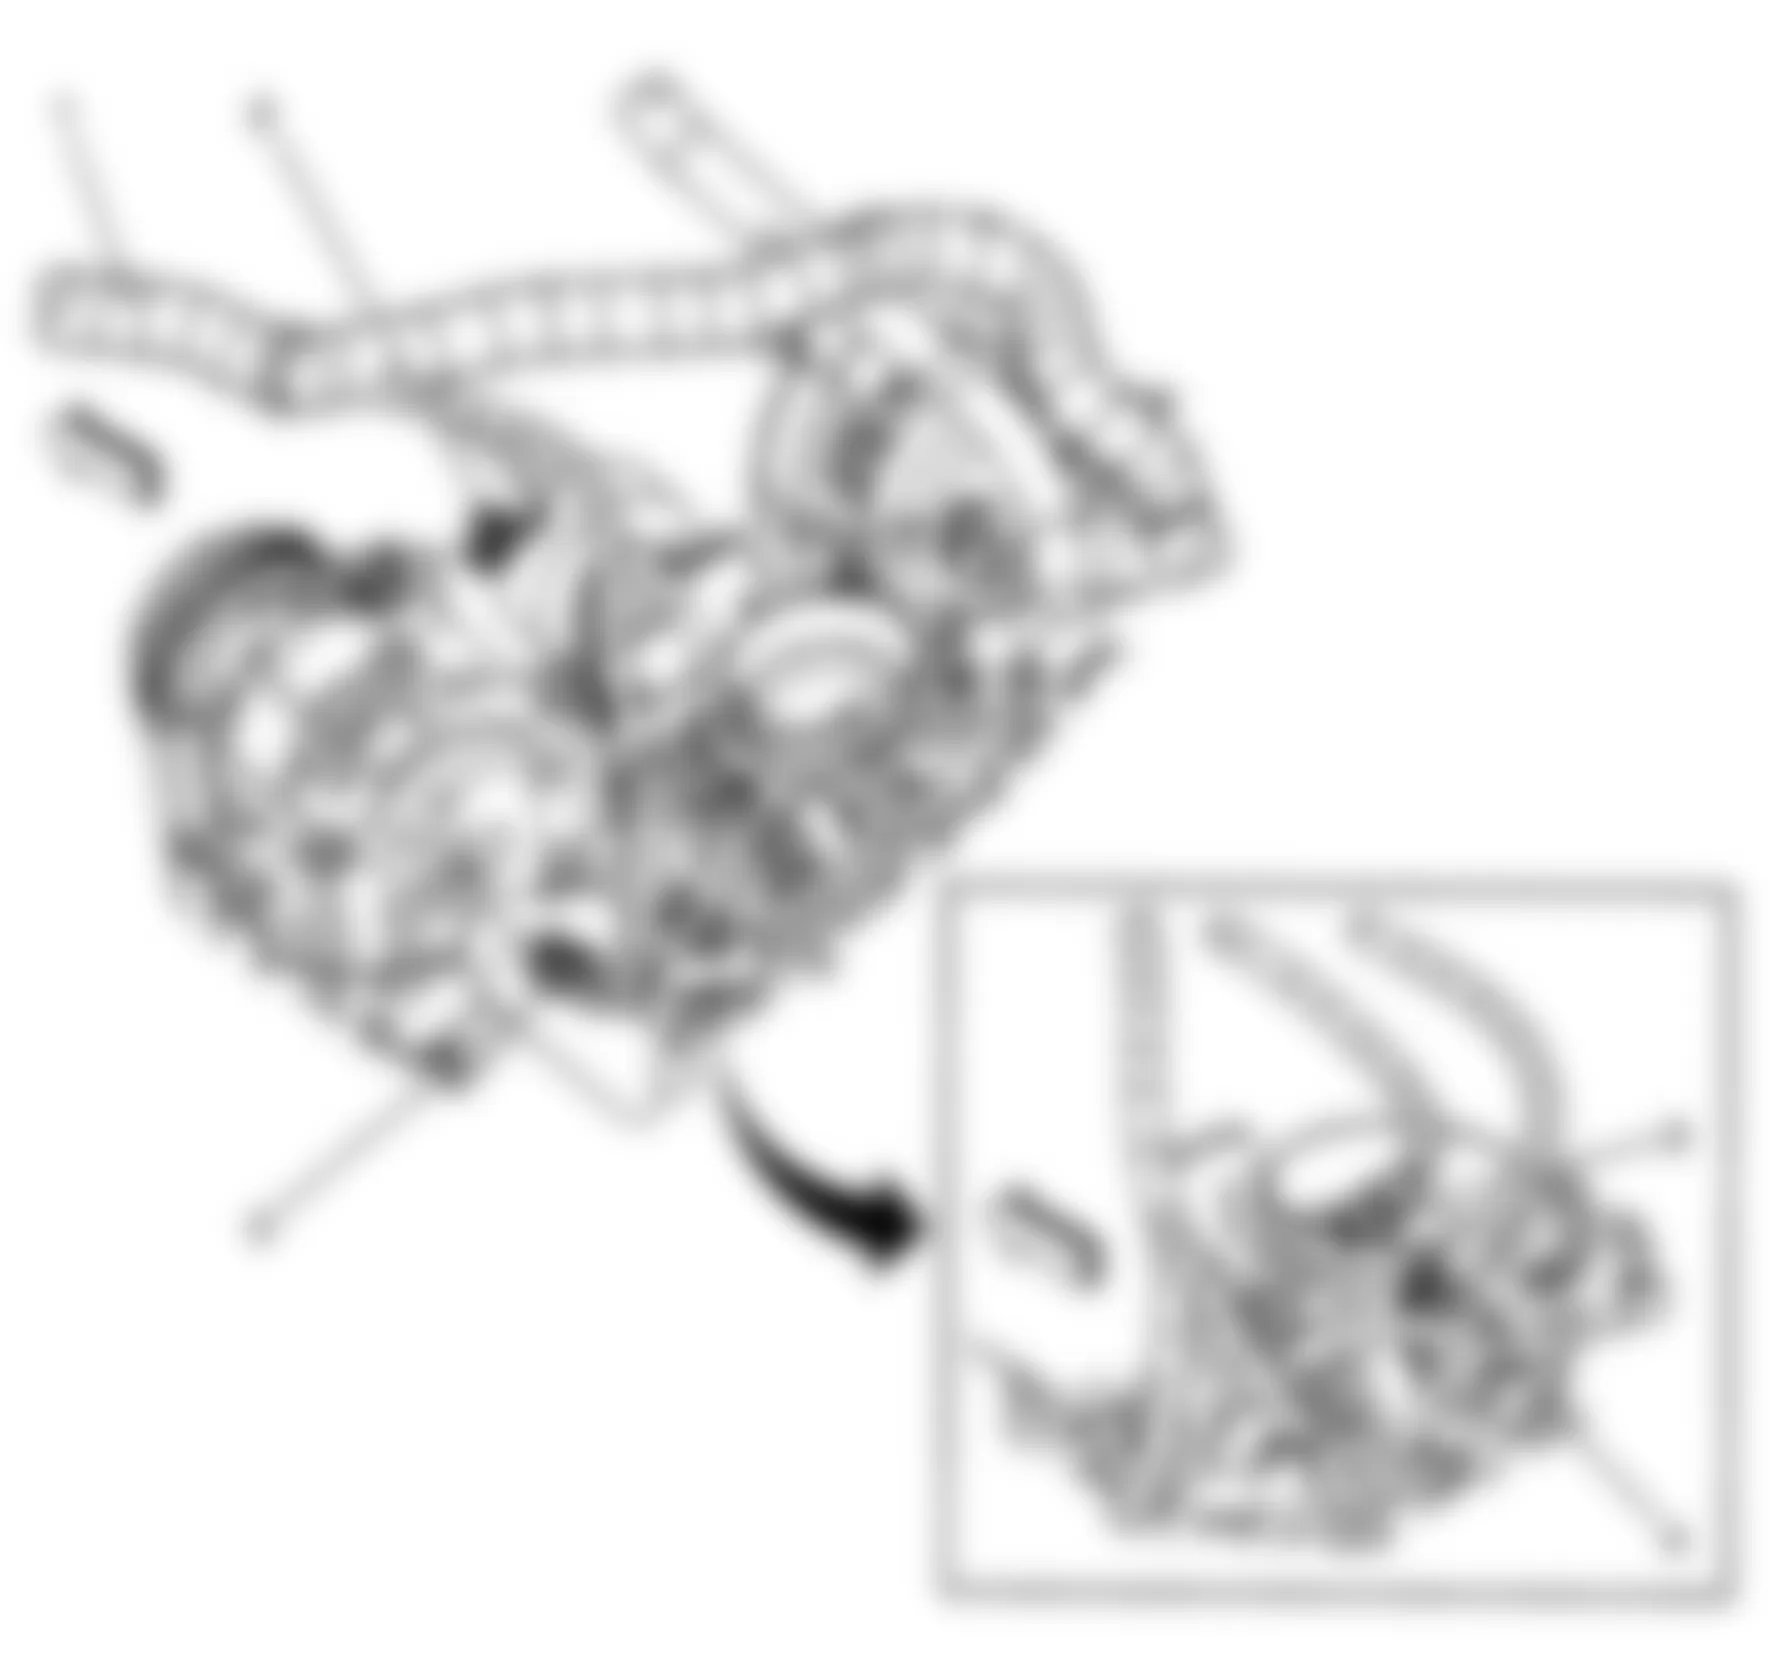 GMC Savana G3500 2010 - Component Locations -  Top Front Side Of Engine (4.3L)